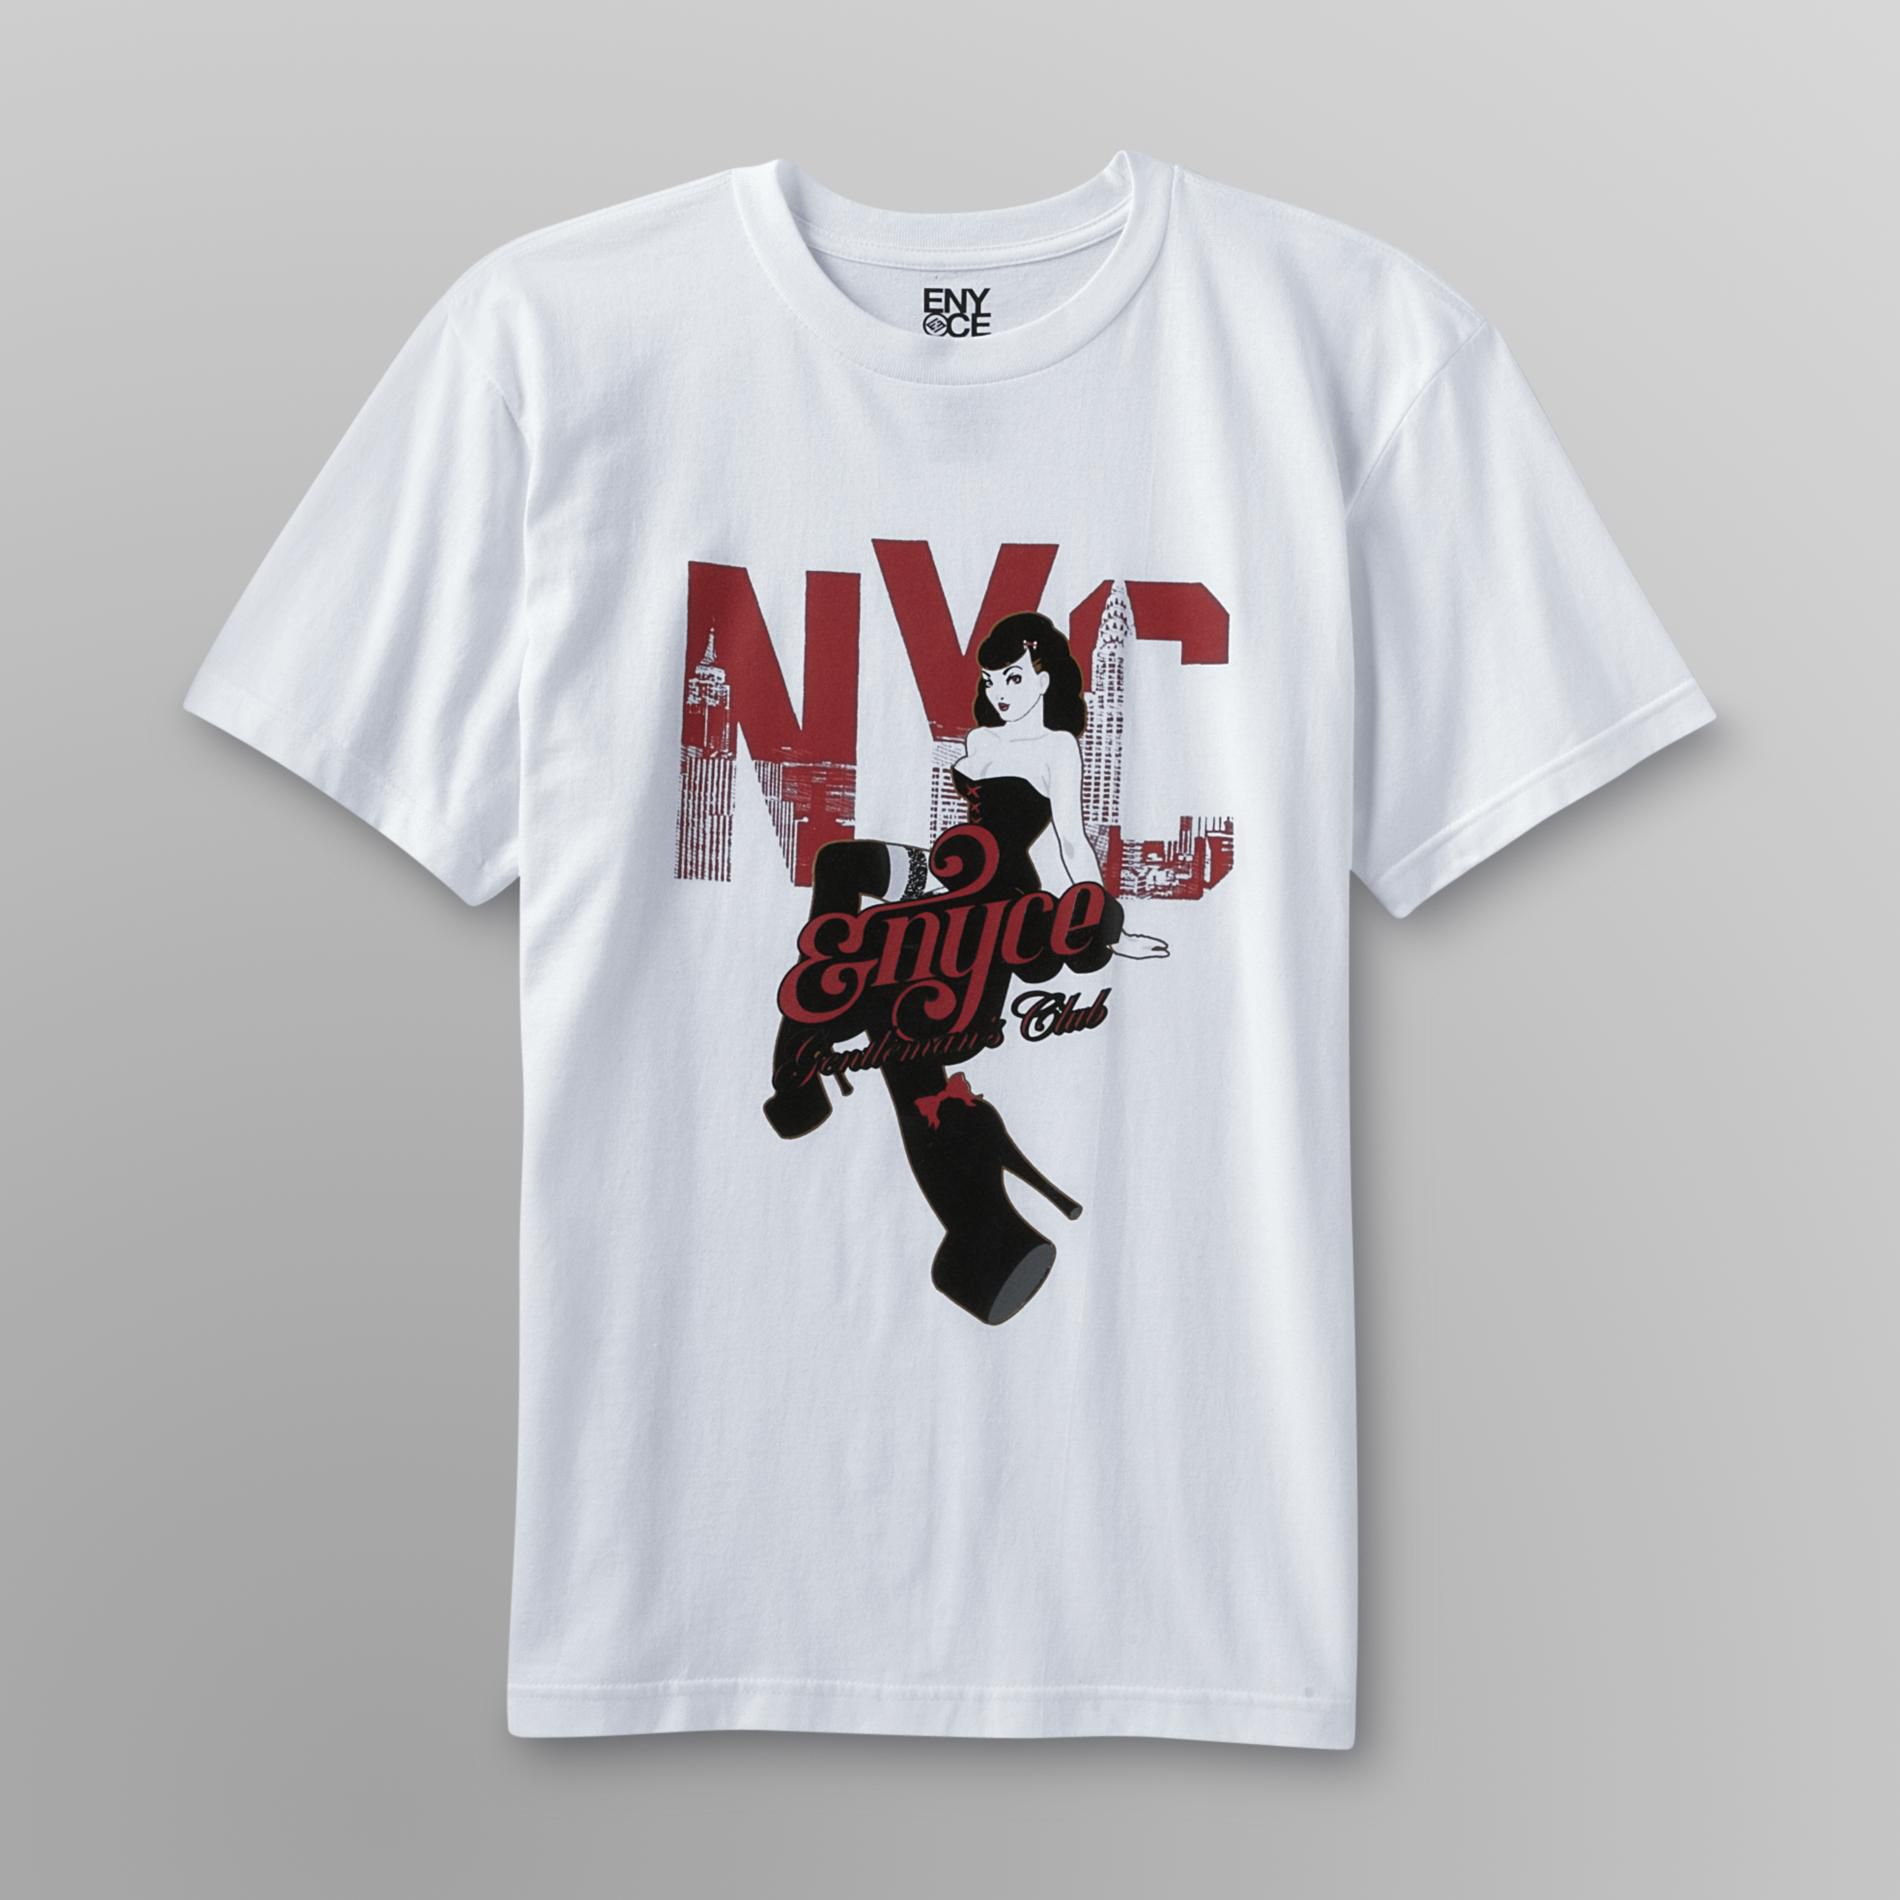 Enyce Young Men's Graphic T-Shirt - Gentleman's Club